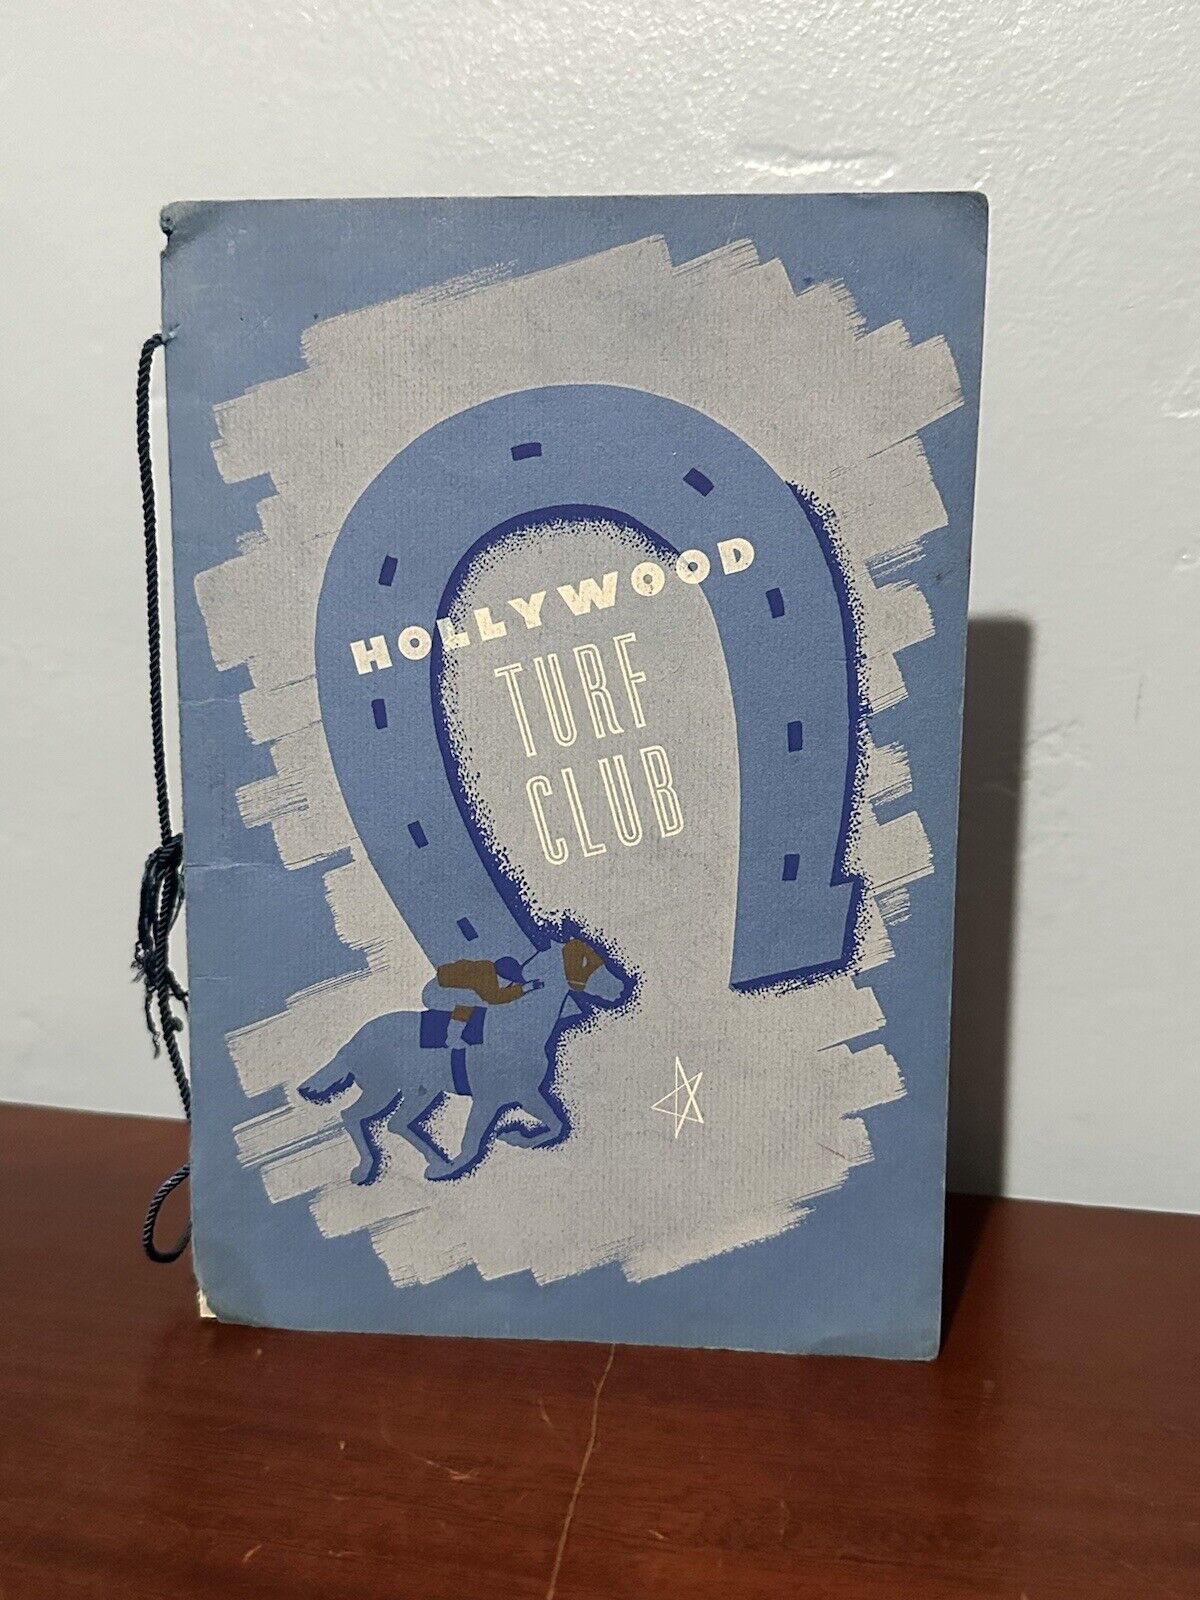 Hollywood Turf Club Park Menu Special Luncheon 1 Year Open June 10 1939 * FLAWS